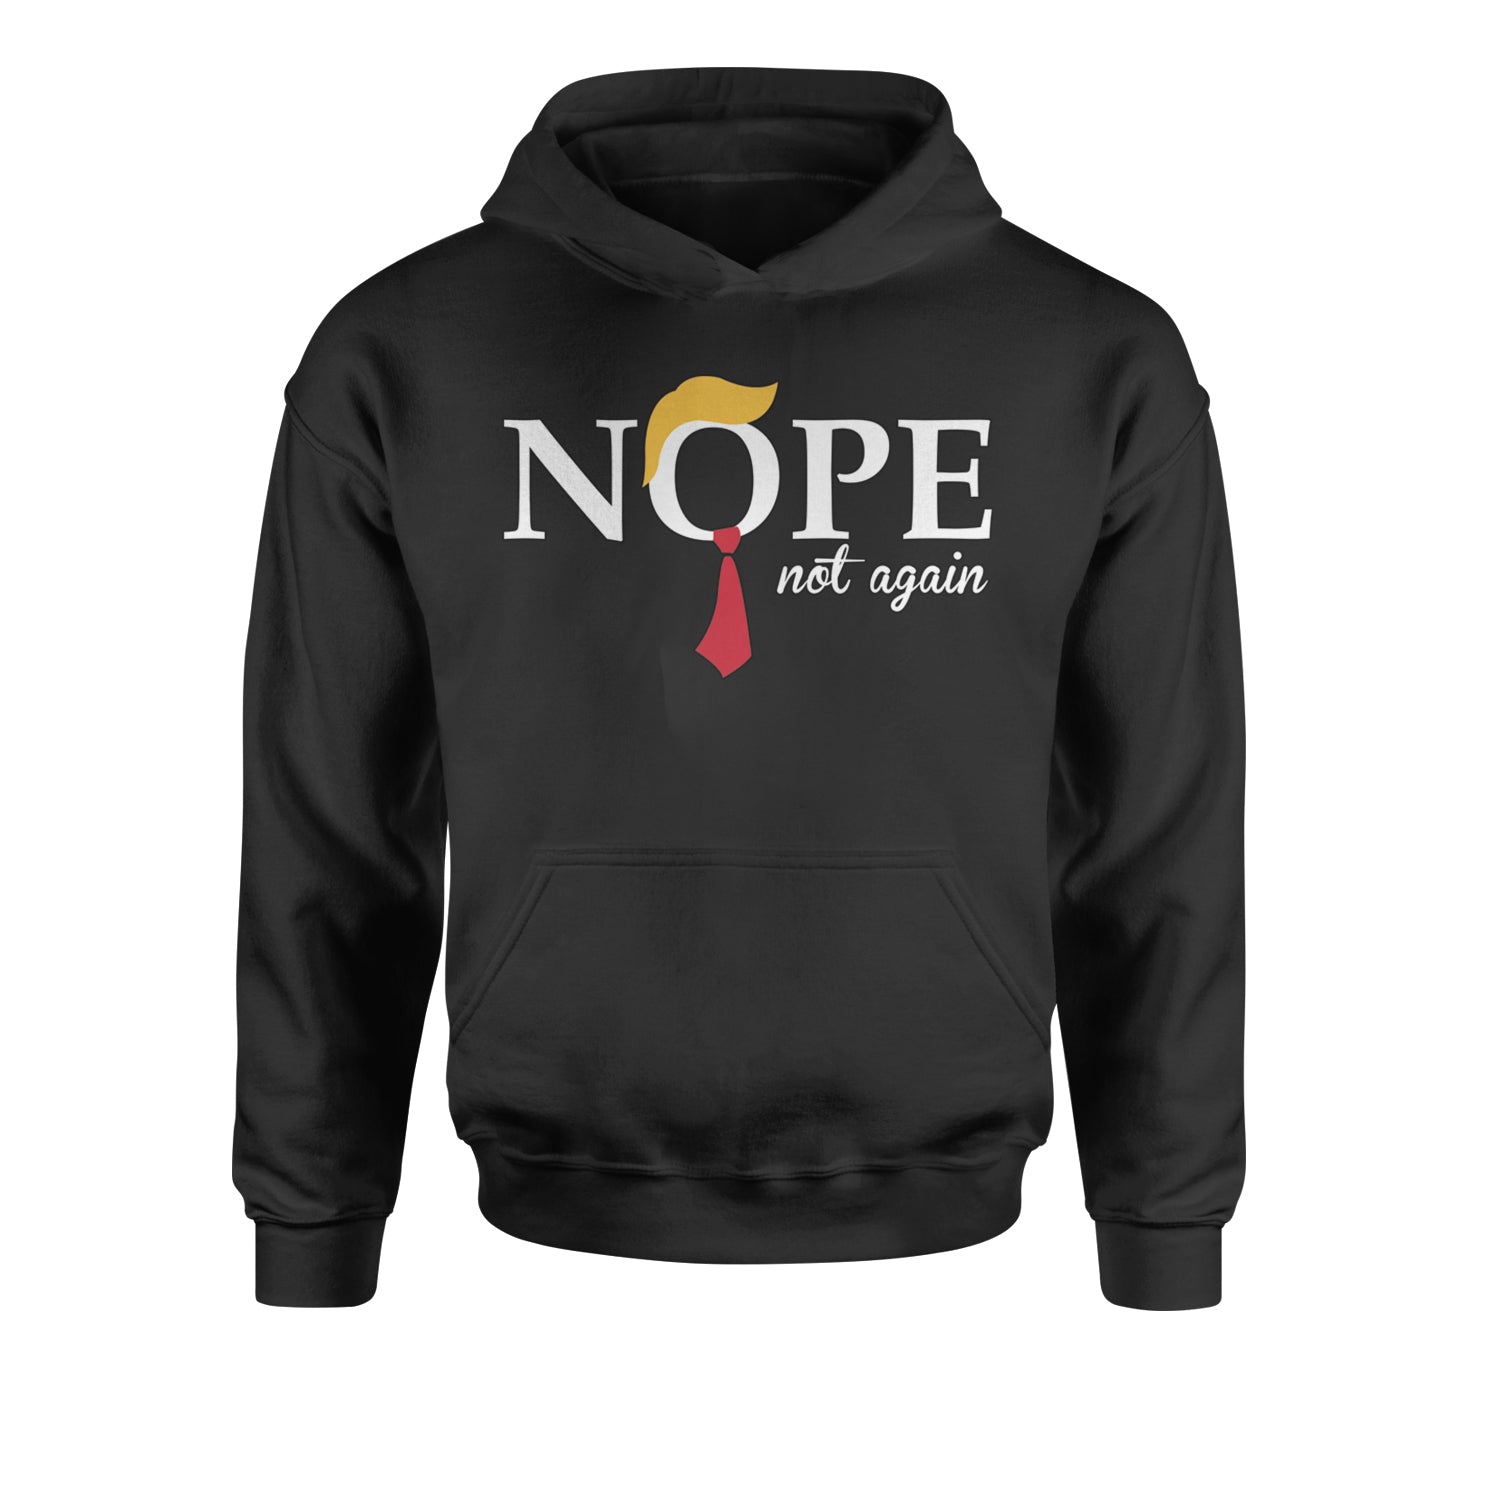 Nope Not Again Swift Anti-Trump Youth-Sized Hoodie